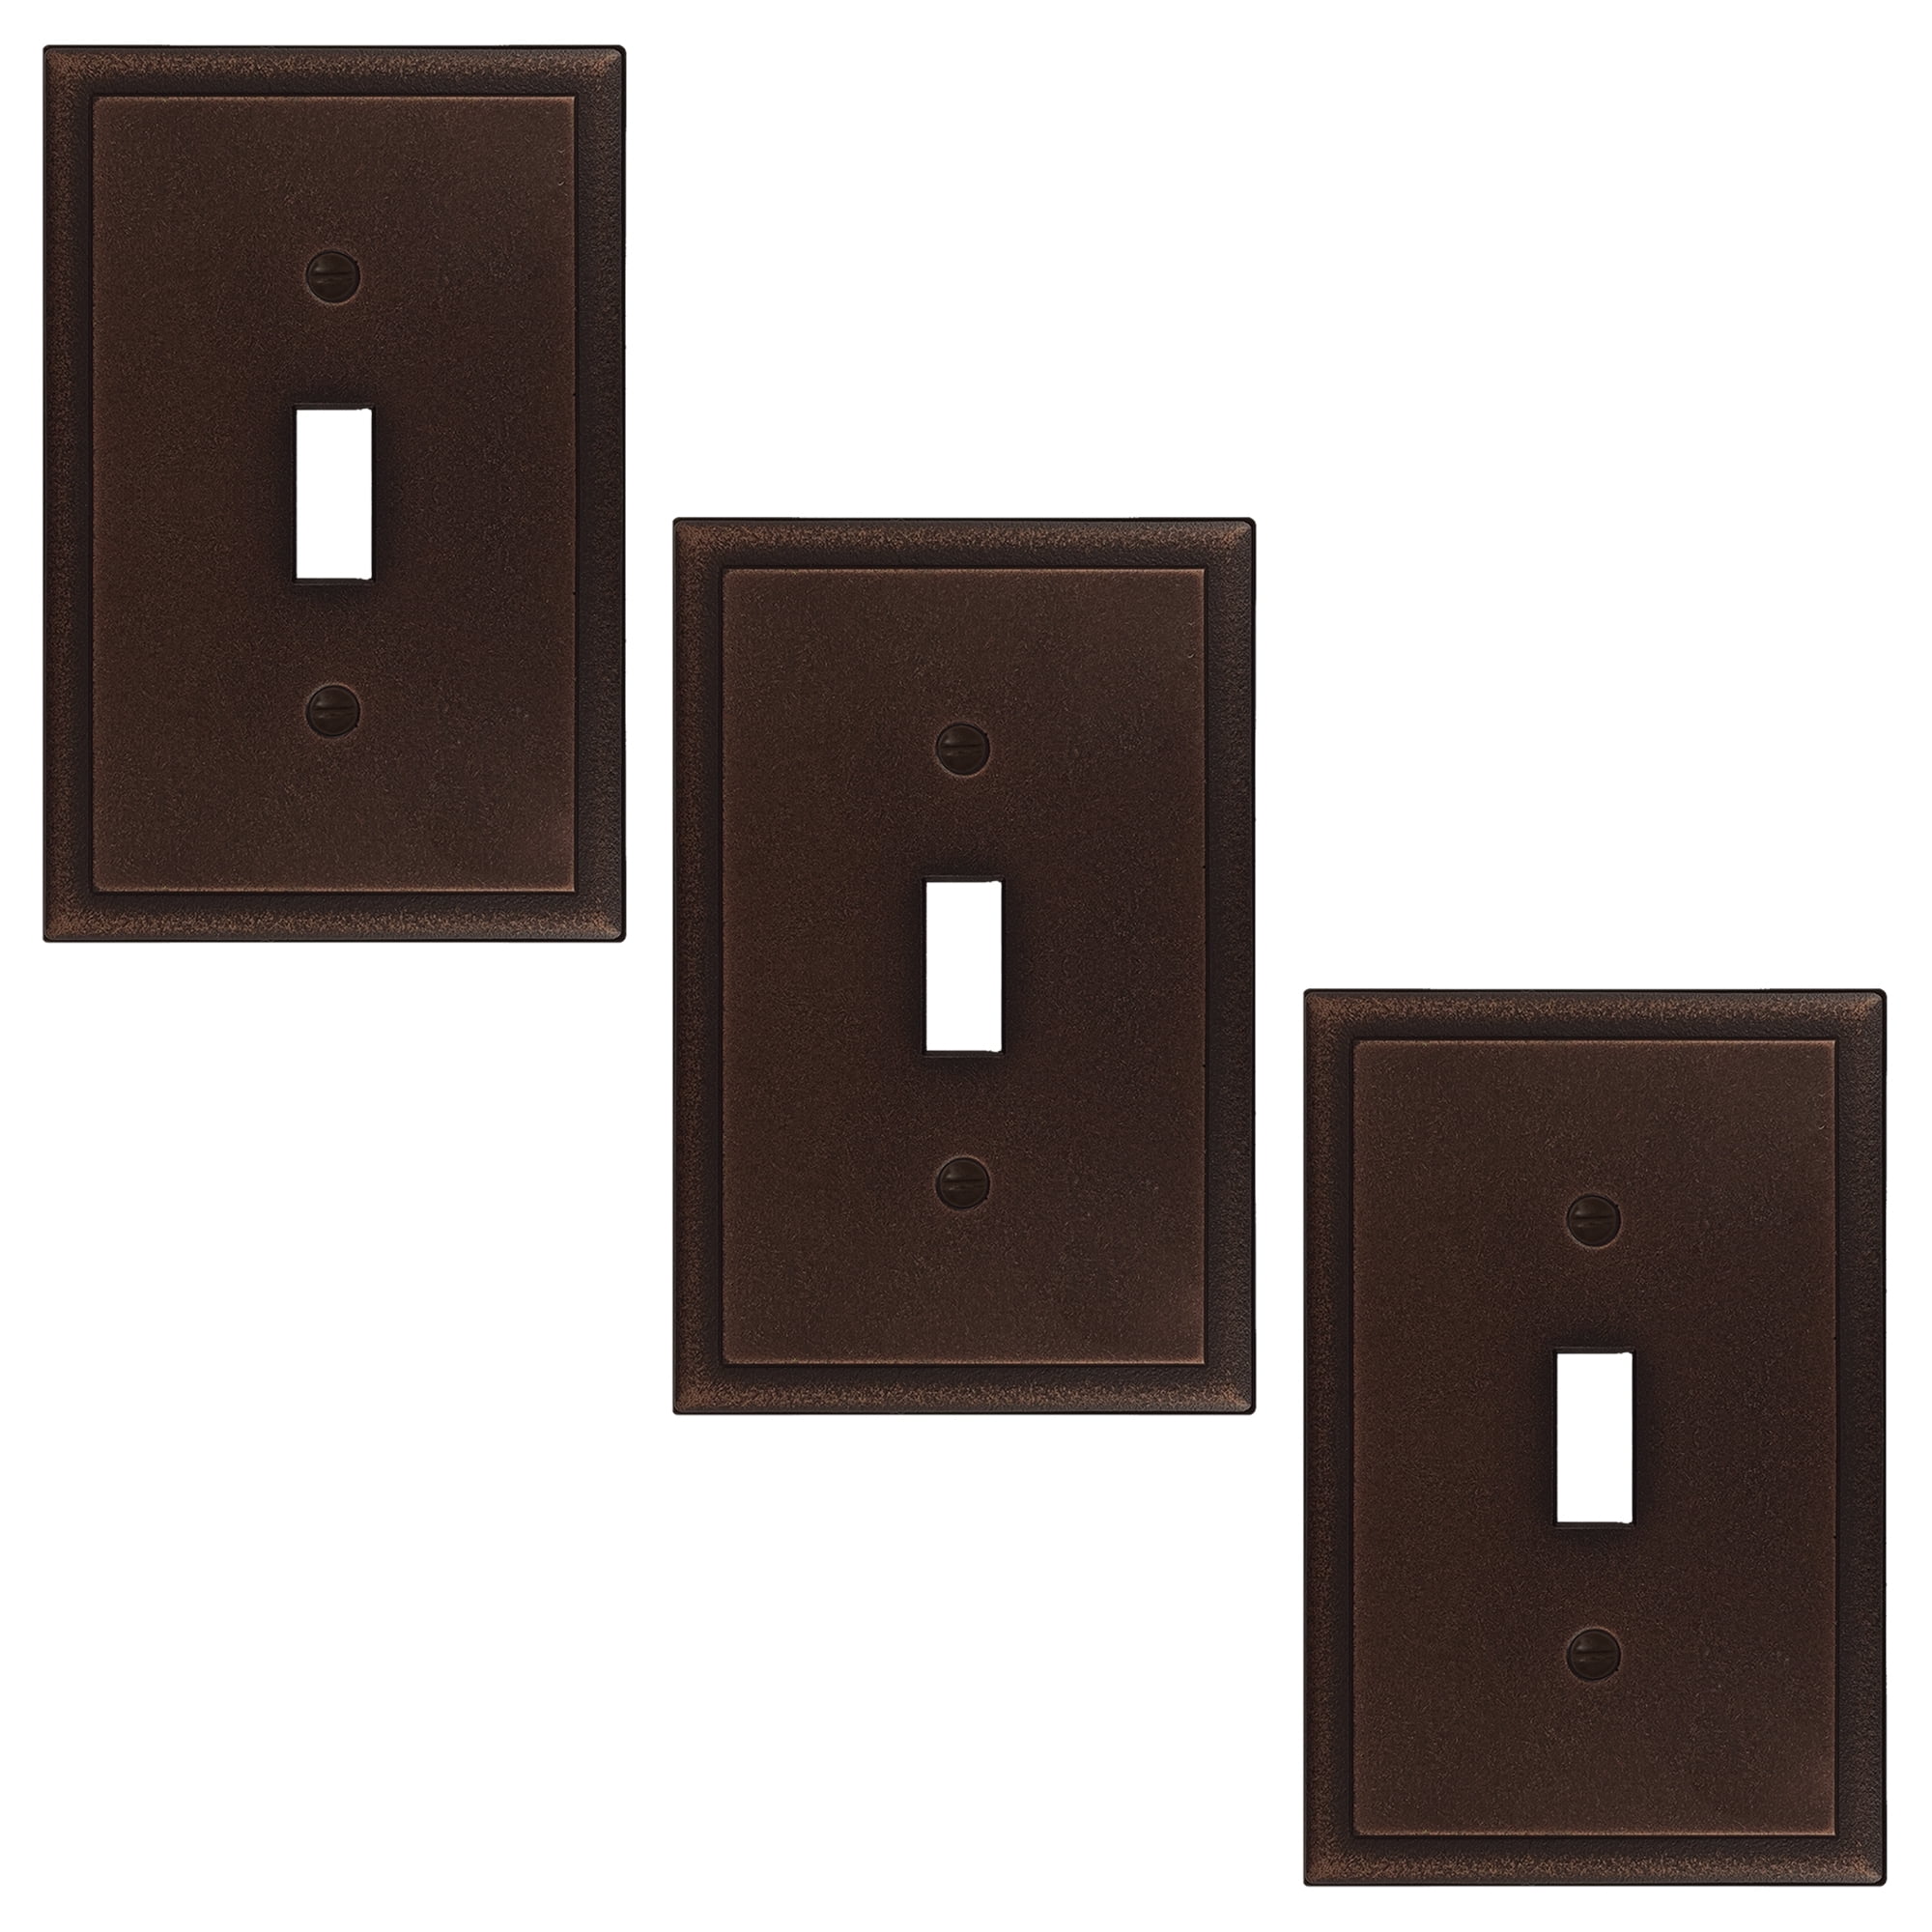 Questech Single Rocker Light Switch Cover Ambient Decorative Wall Plate Oil Rubbed Bronze Metal Finish